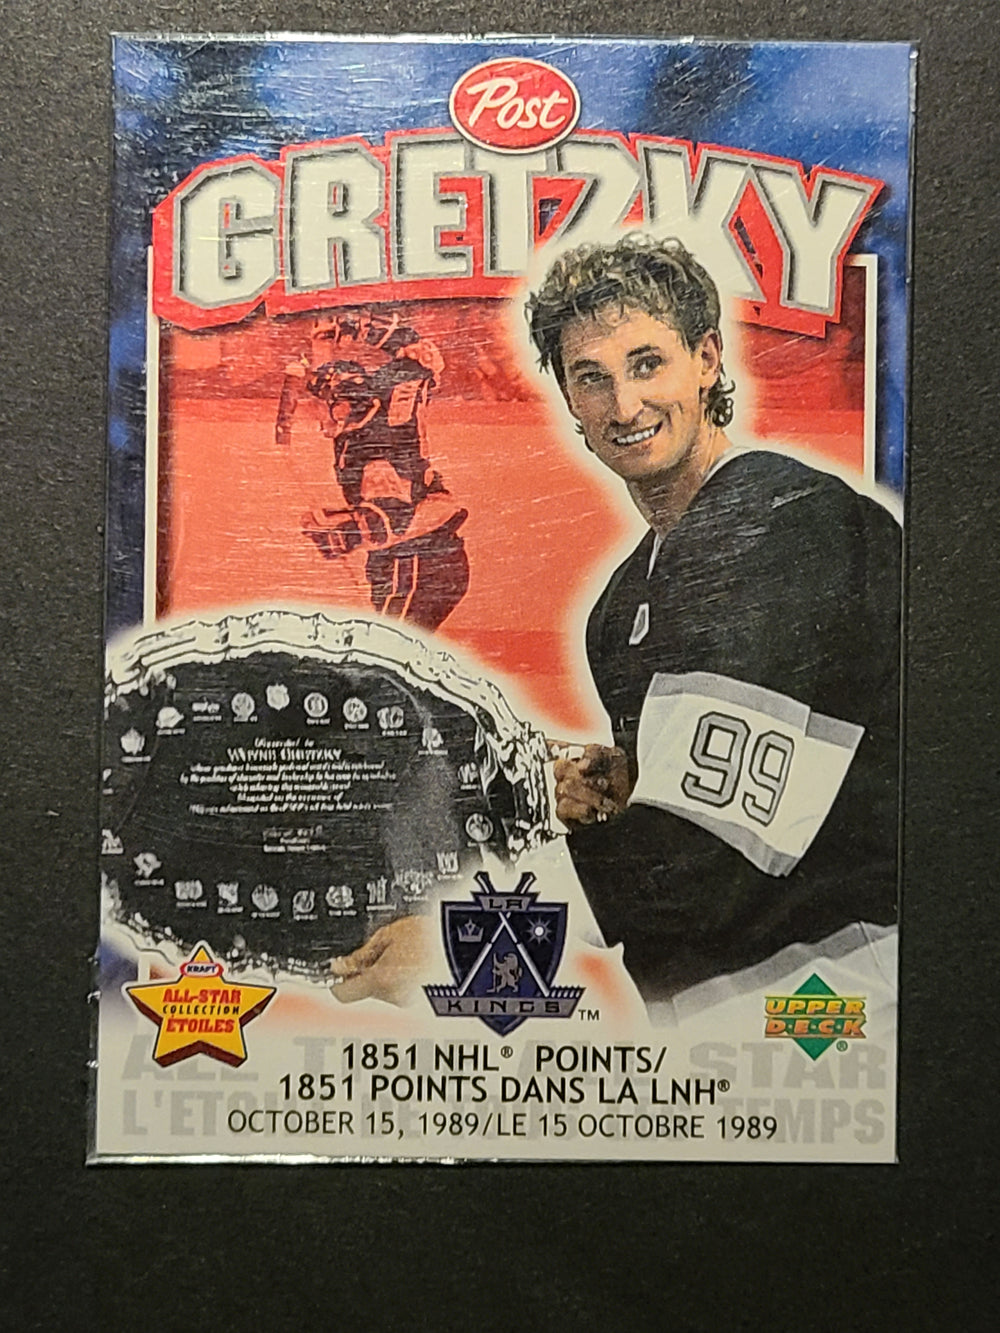 1999-00 Post Cereal Wayne Gretzky Moment 4 of 7 1851 Points